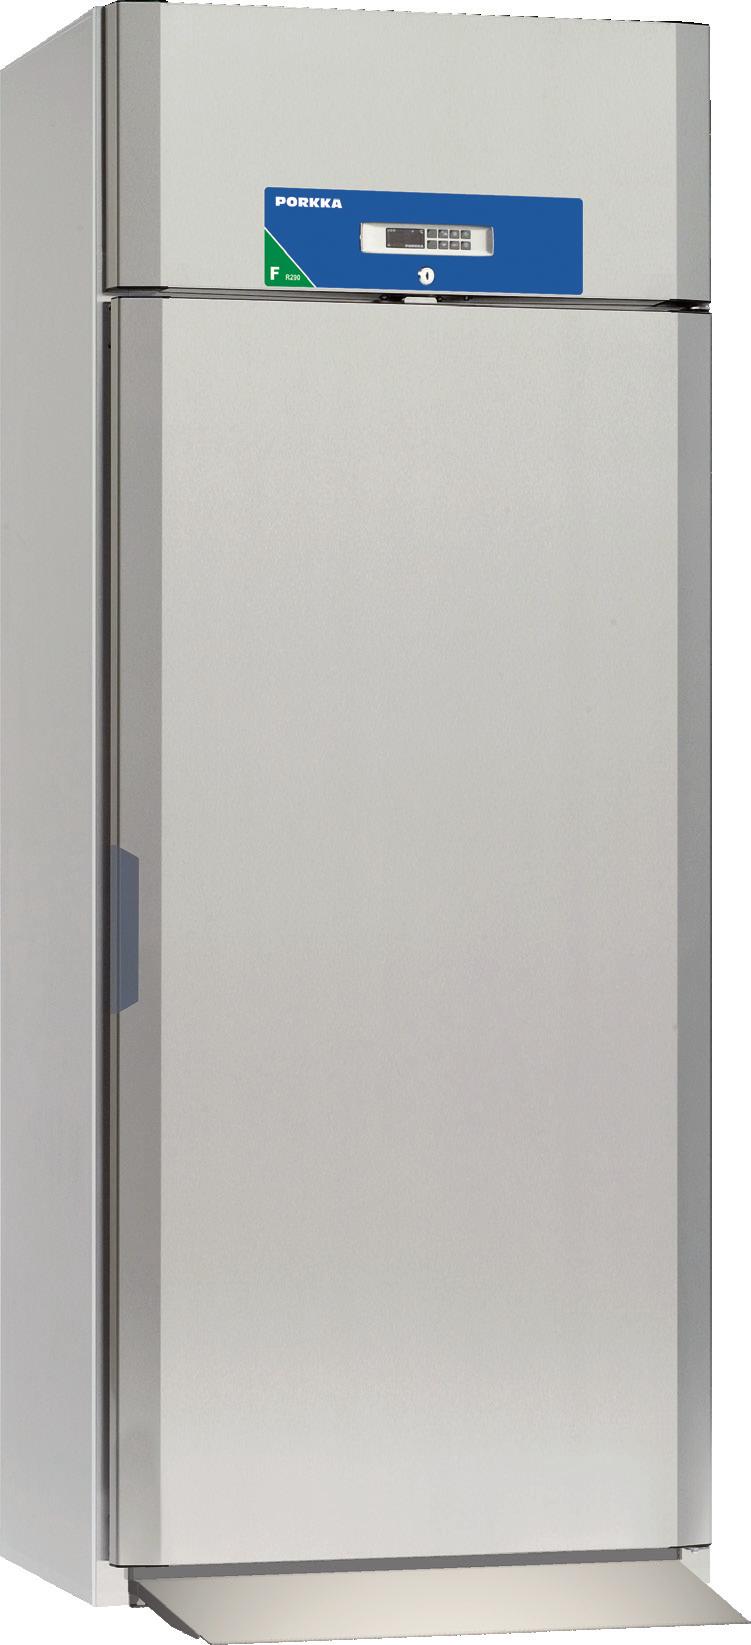 Professional roll-in cabinets Future freezer Roll-in cabinet RIF R290 RIF 960 E with floor and ramp RIF 960 CC with floor and ramp RIF 960 CO2 with floor and ramp Exterior dimensions 850 x 1030 x